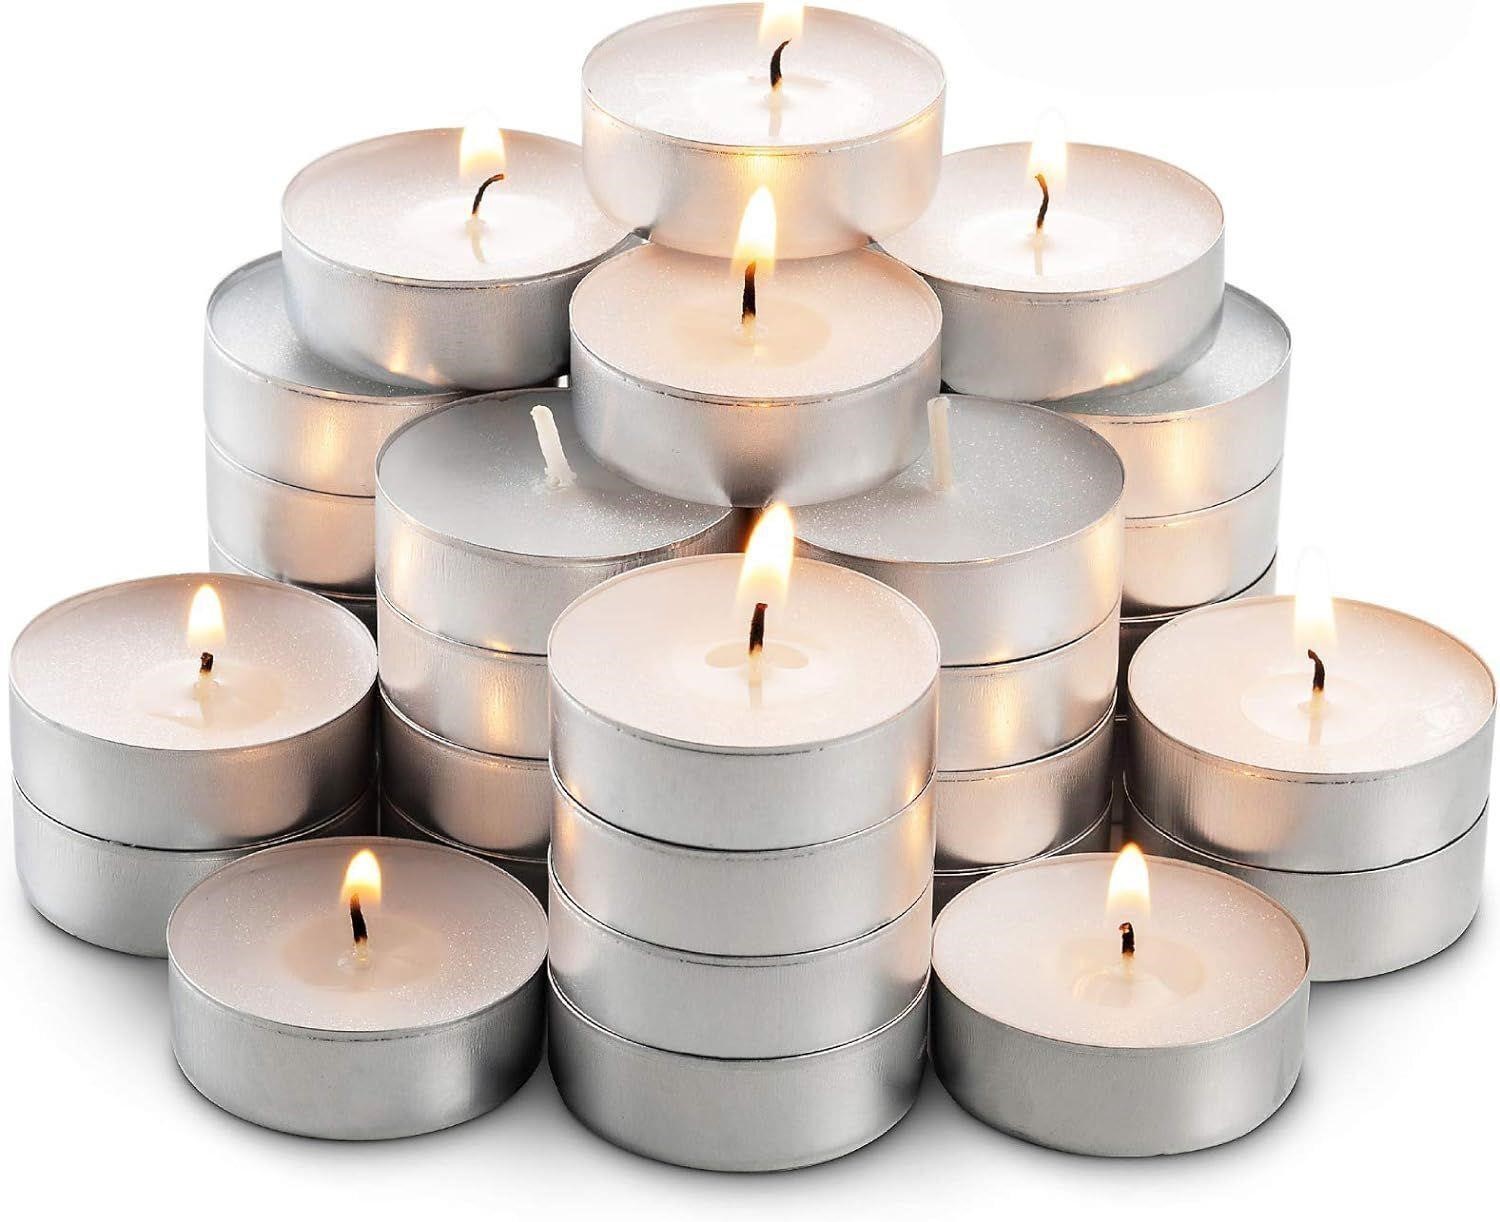 Unscented Tea Lights Candles in Bulk | 45 White